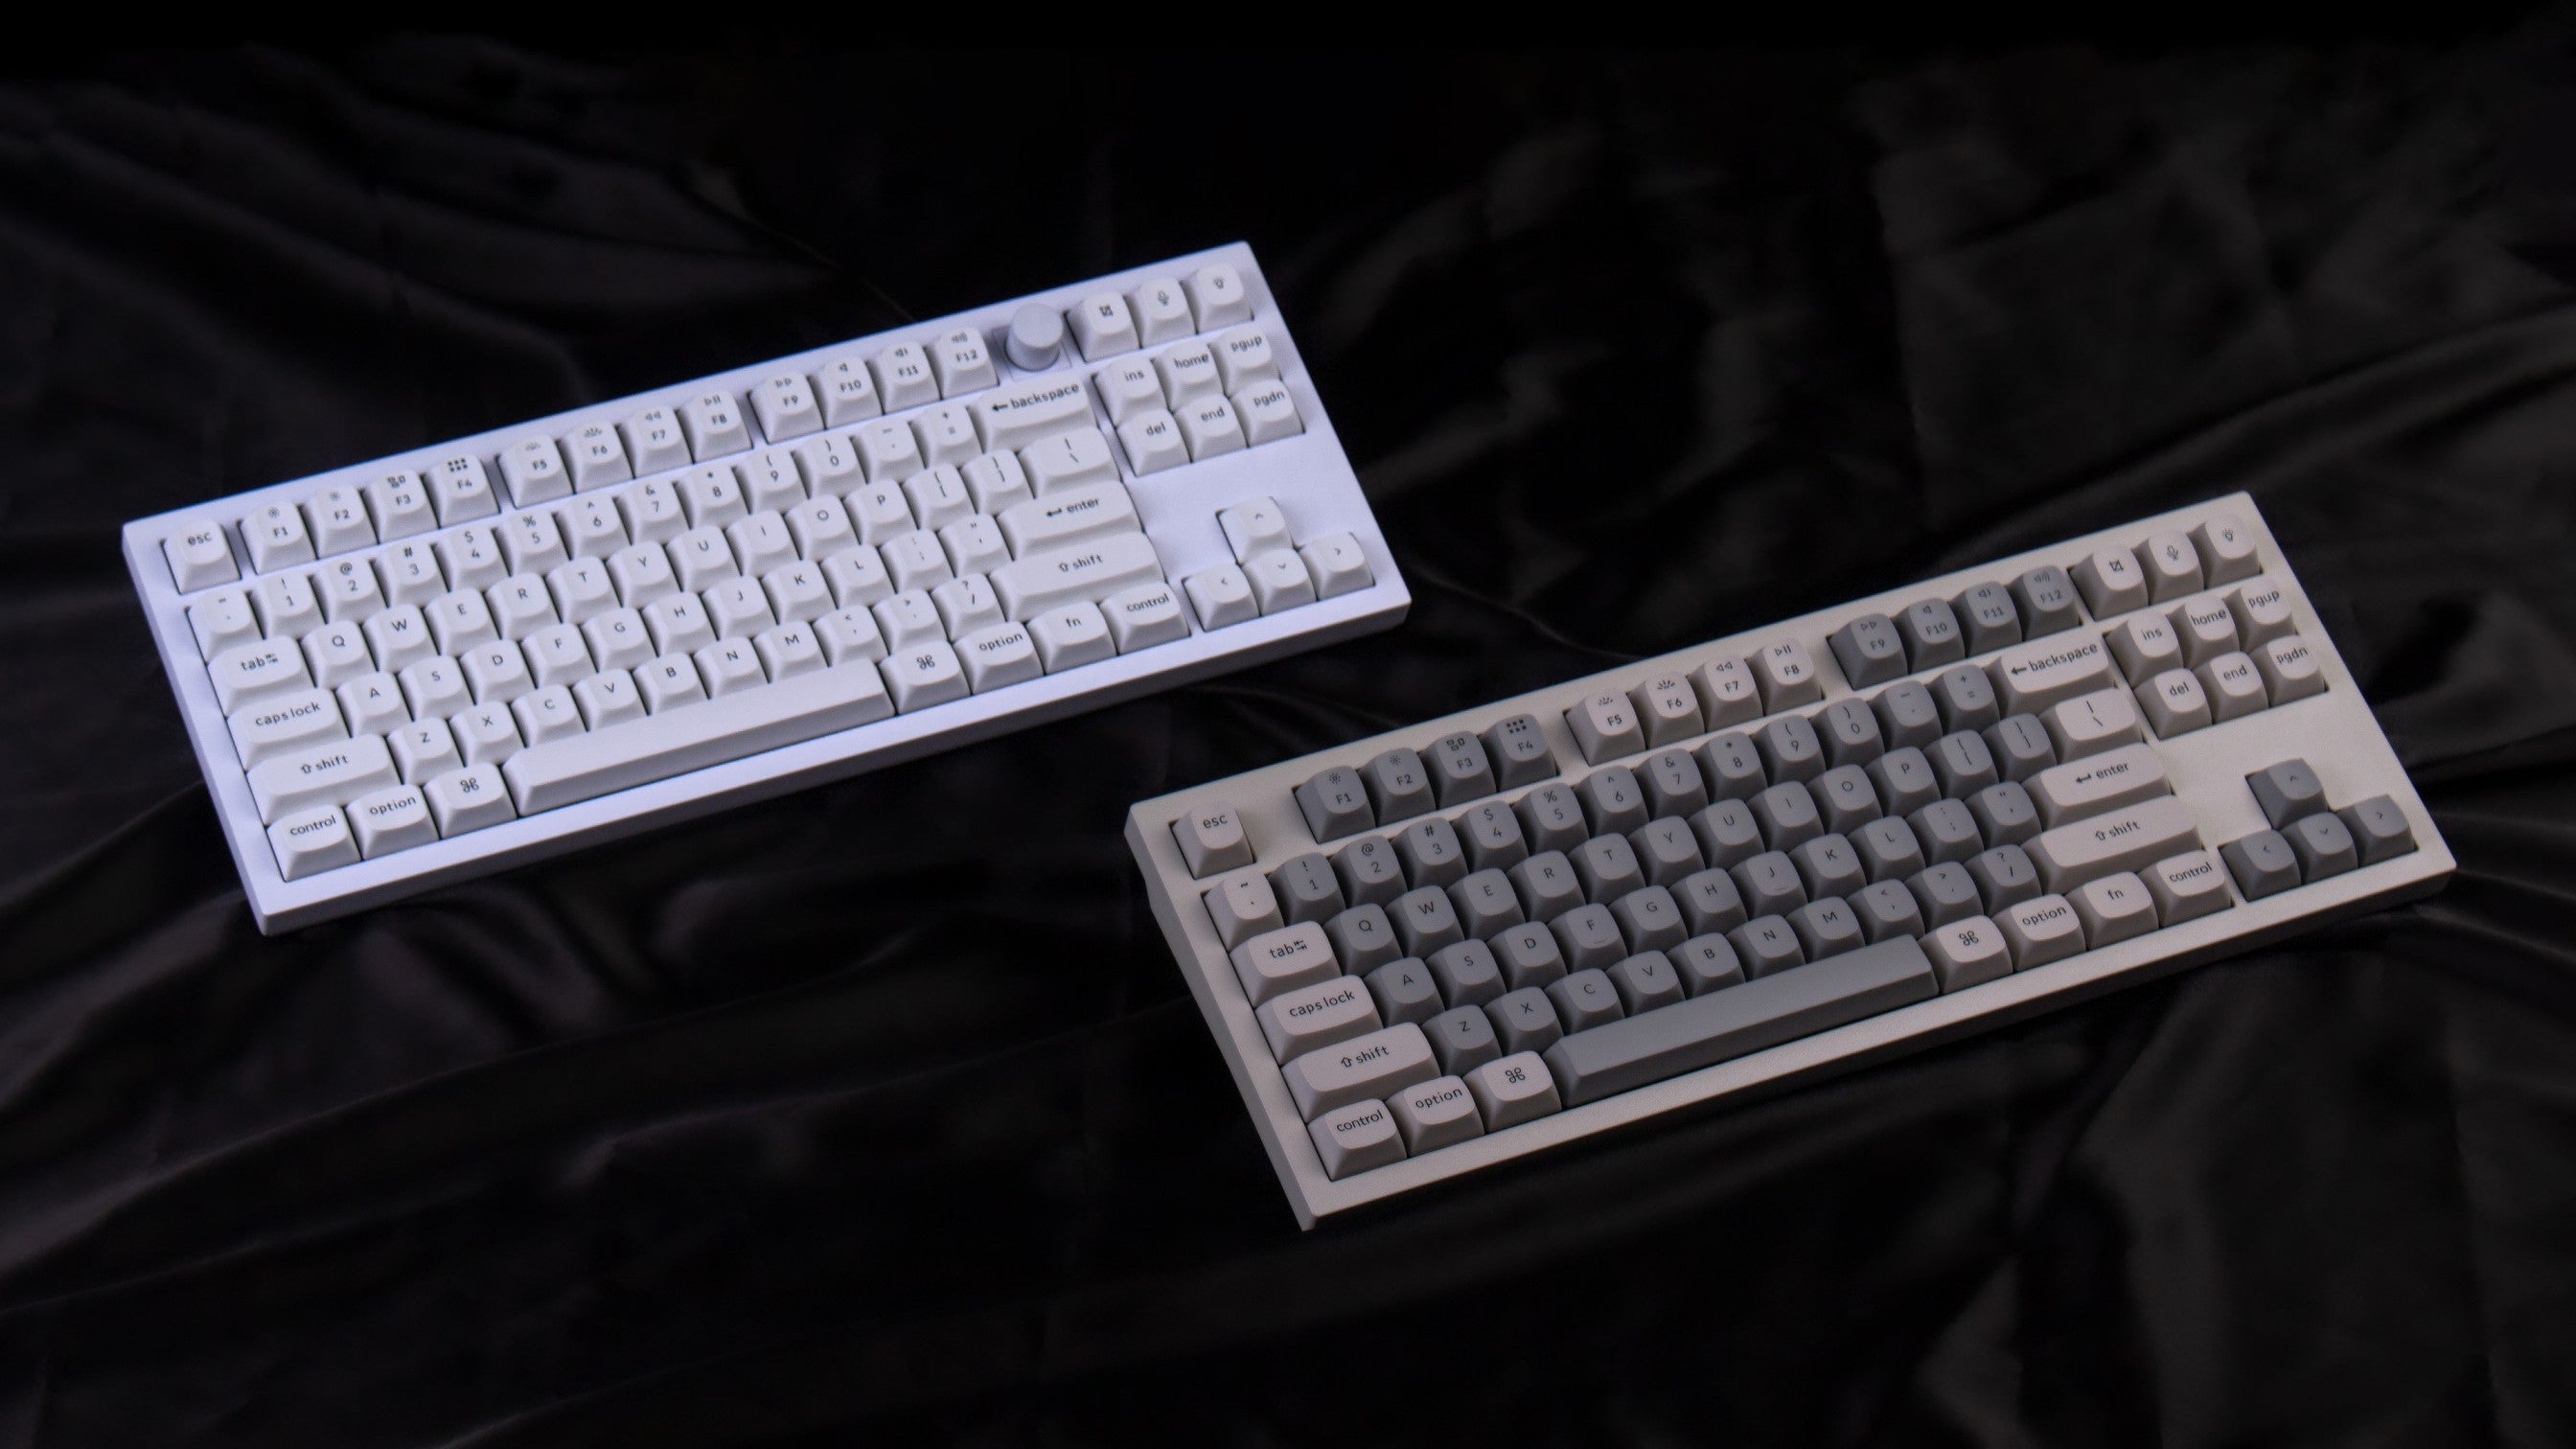 Keychron Keyboard Article Review - June 2022 – Keychron